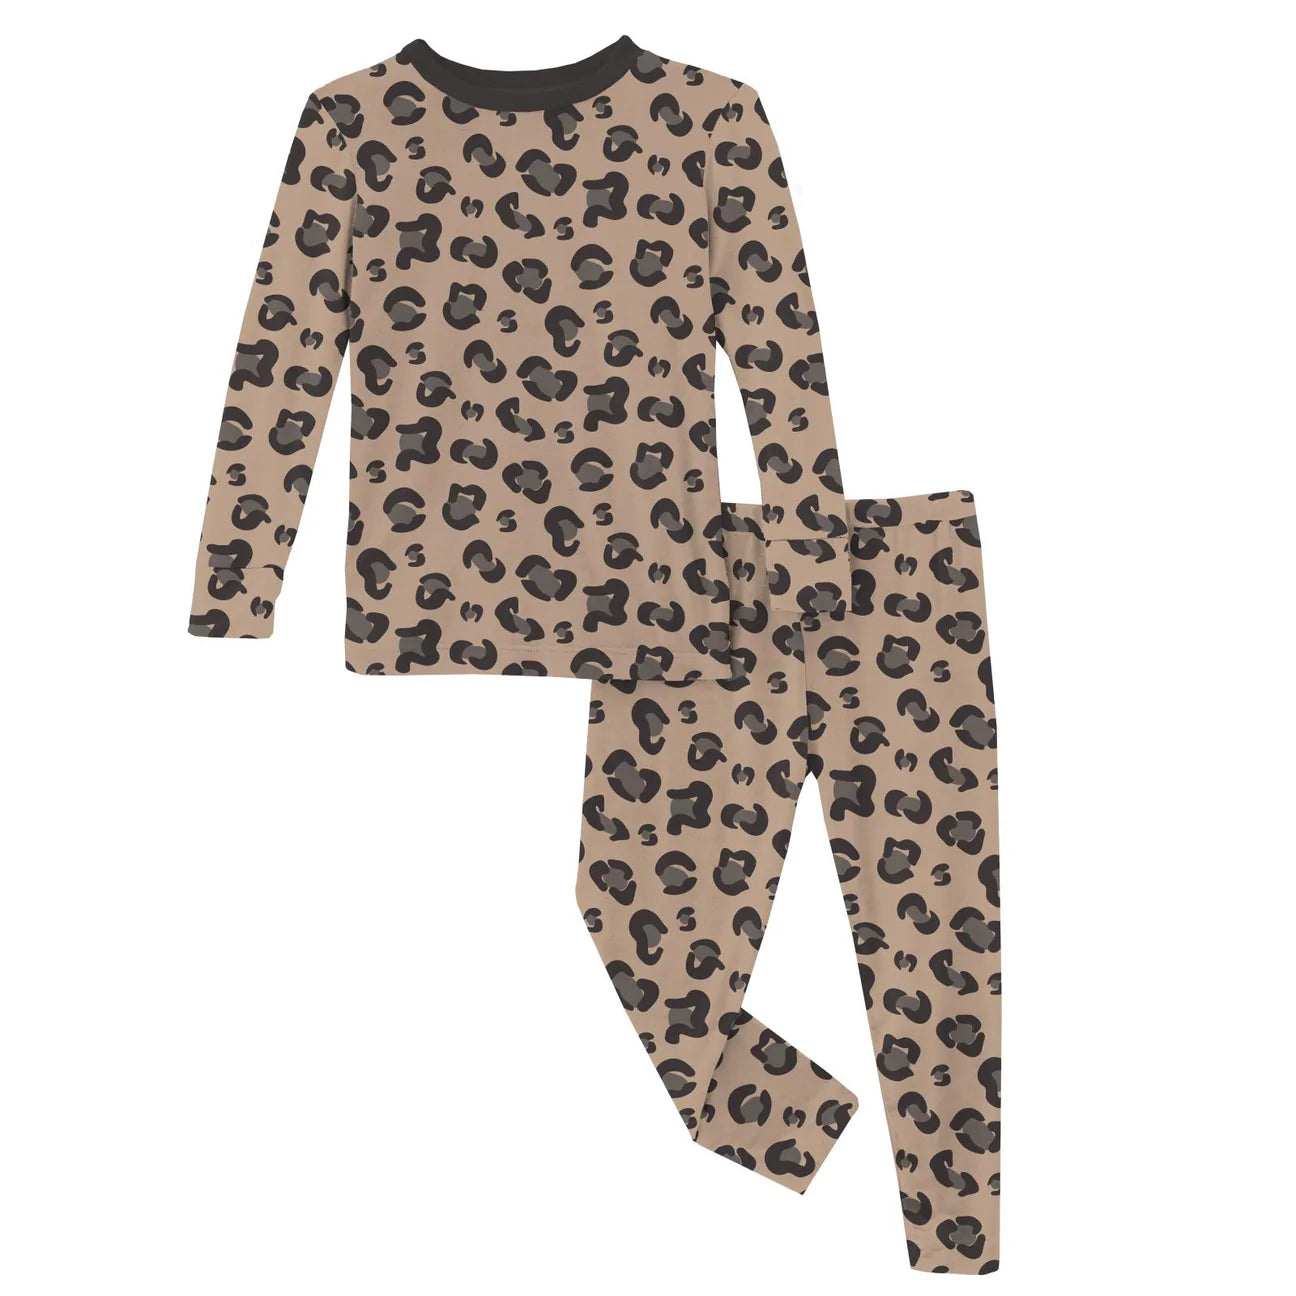 Print Long Sleeve Pajama Set in Suede Cheetah Print  - Doodlebug's Children's Boutique